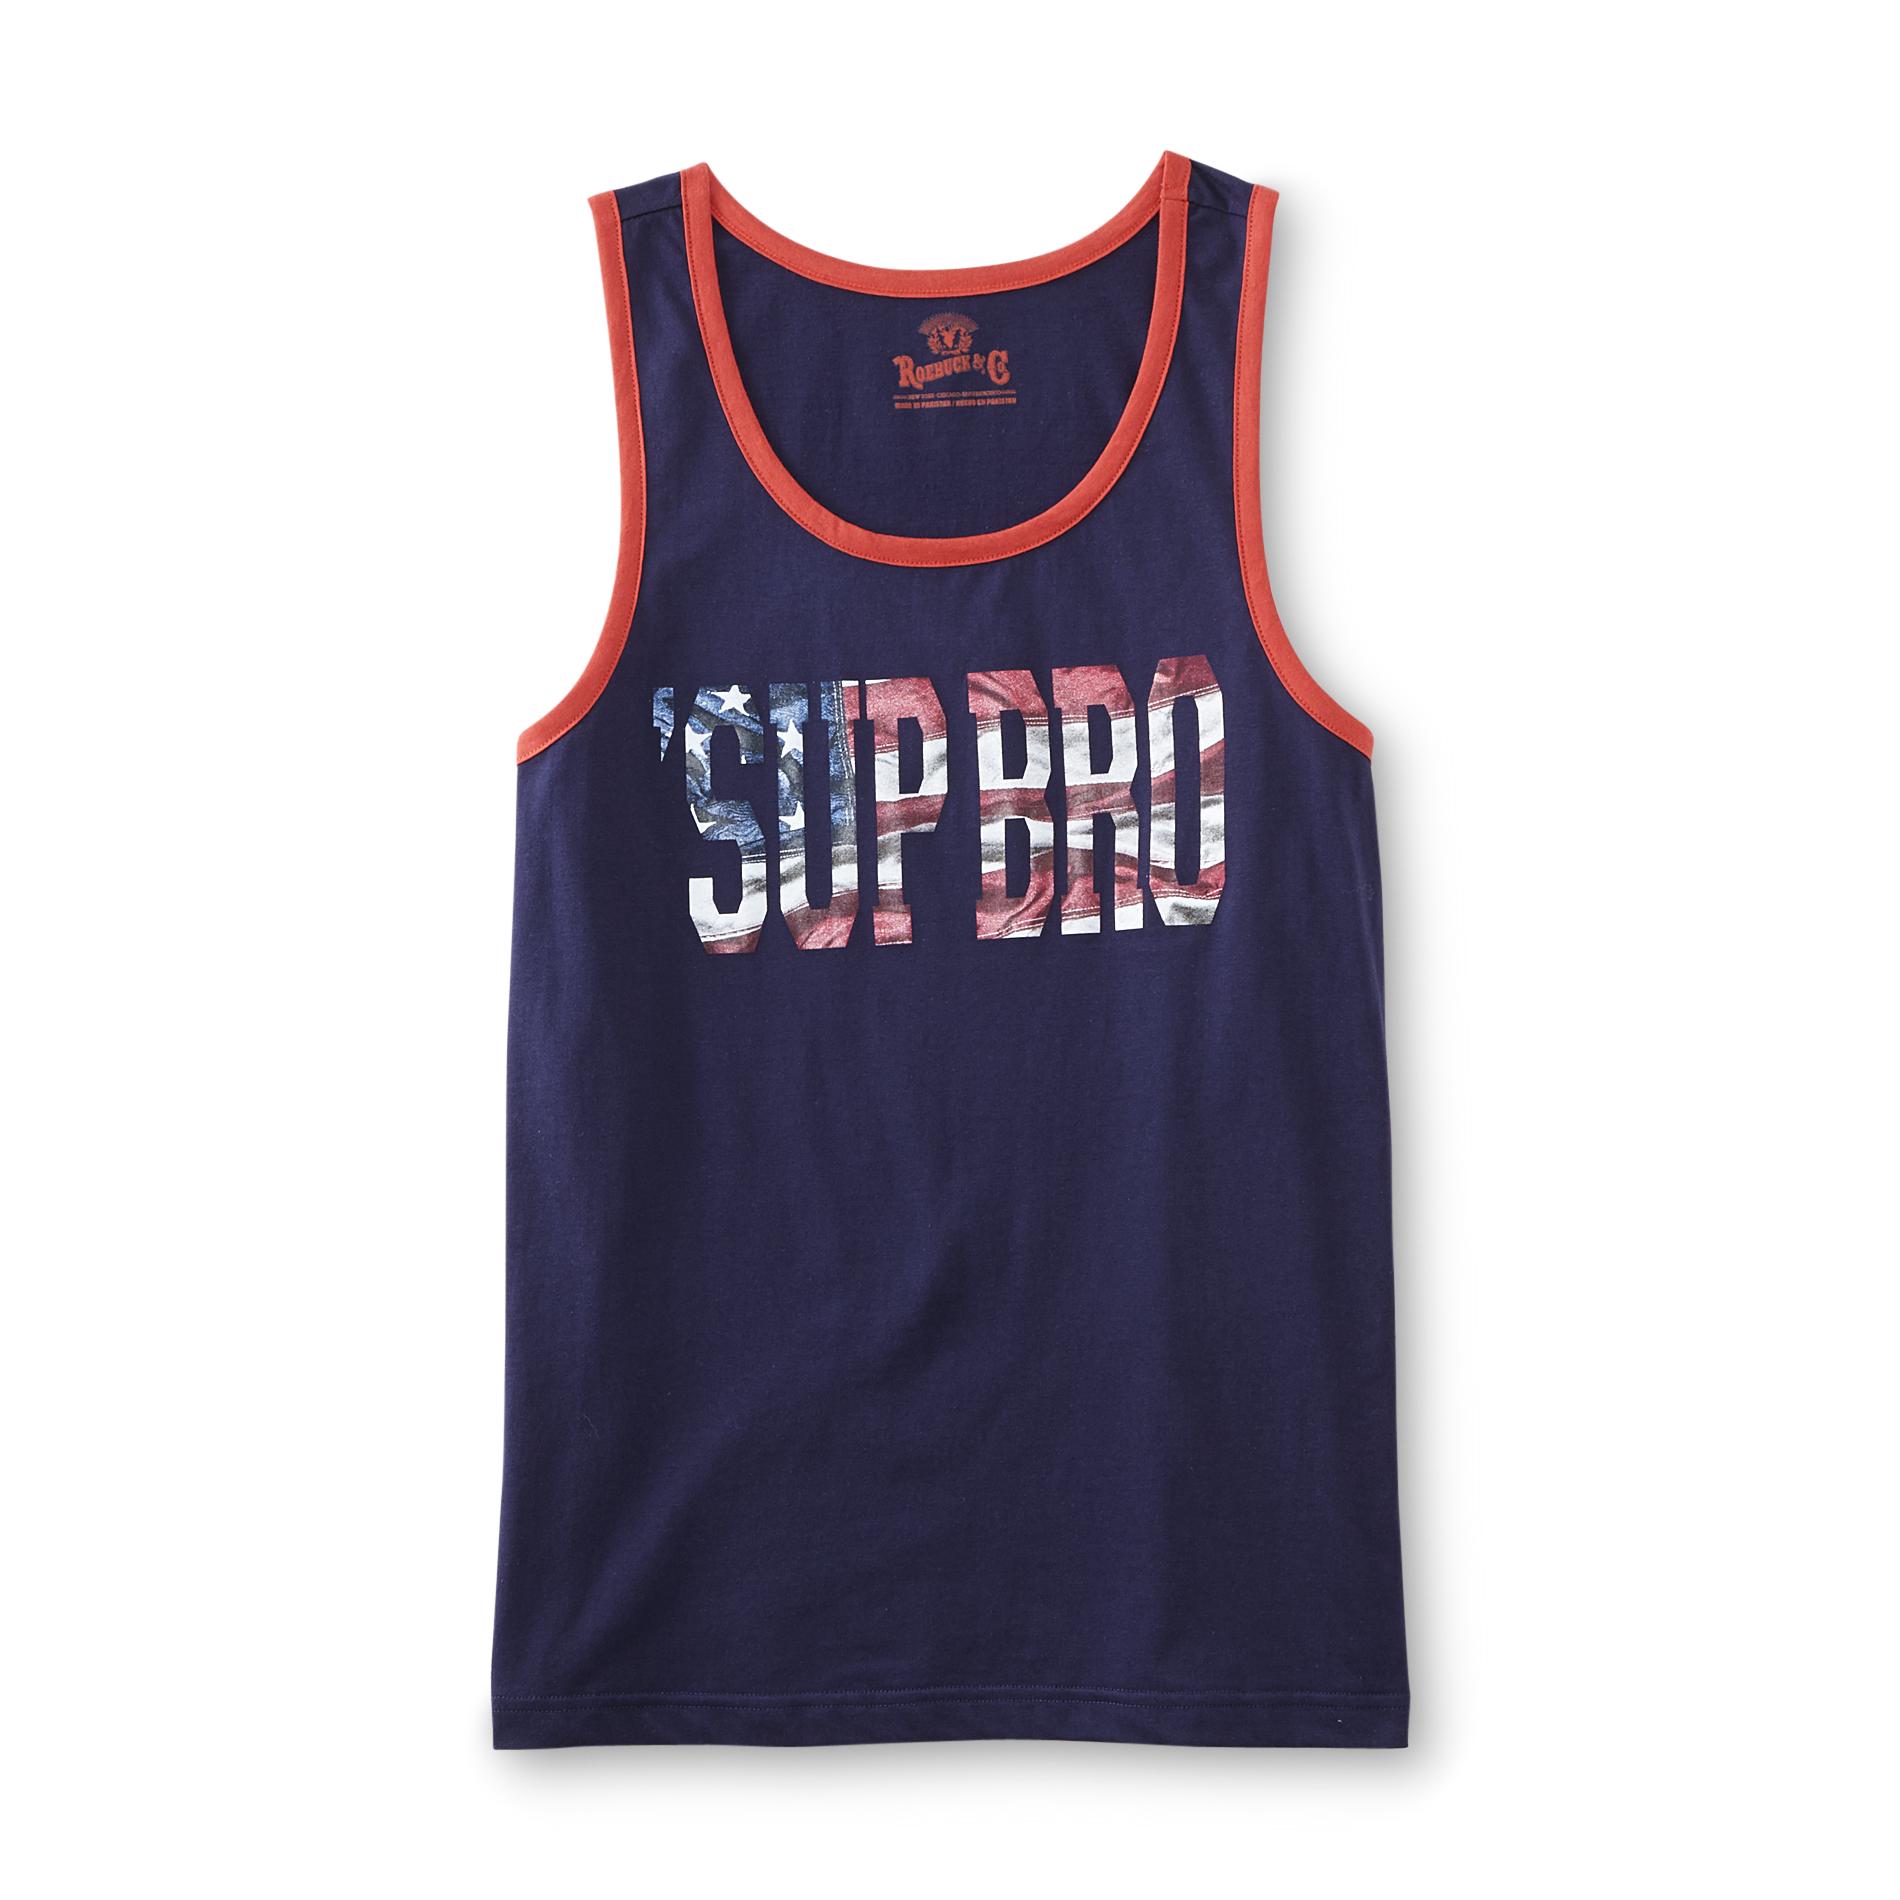 Roebuck & Co. Young Men's Graphic Surfer Tank Top - 'Sup Bro